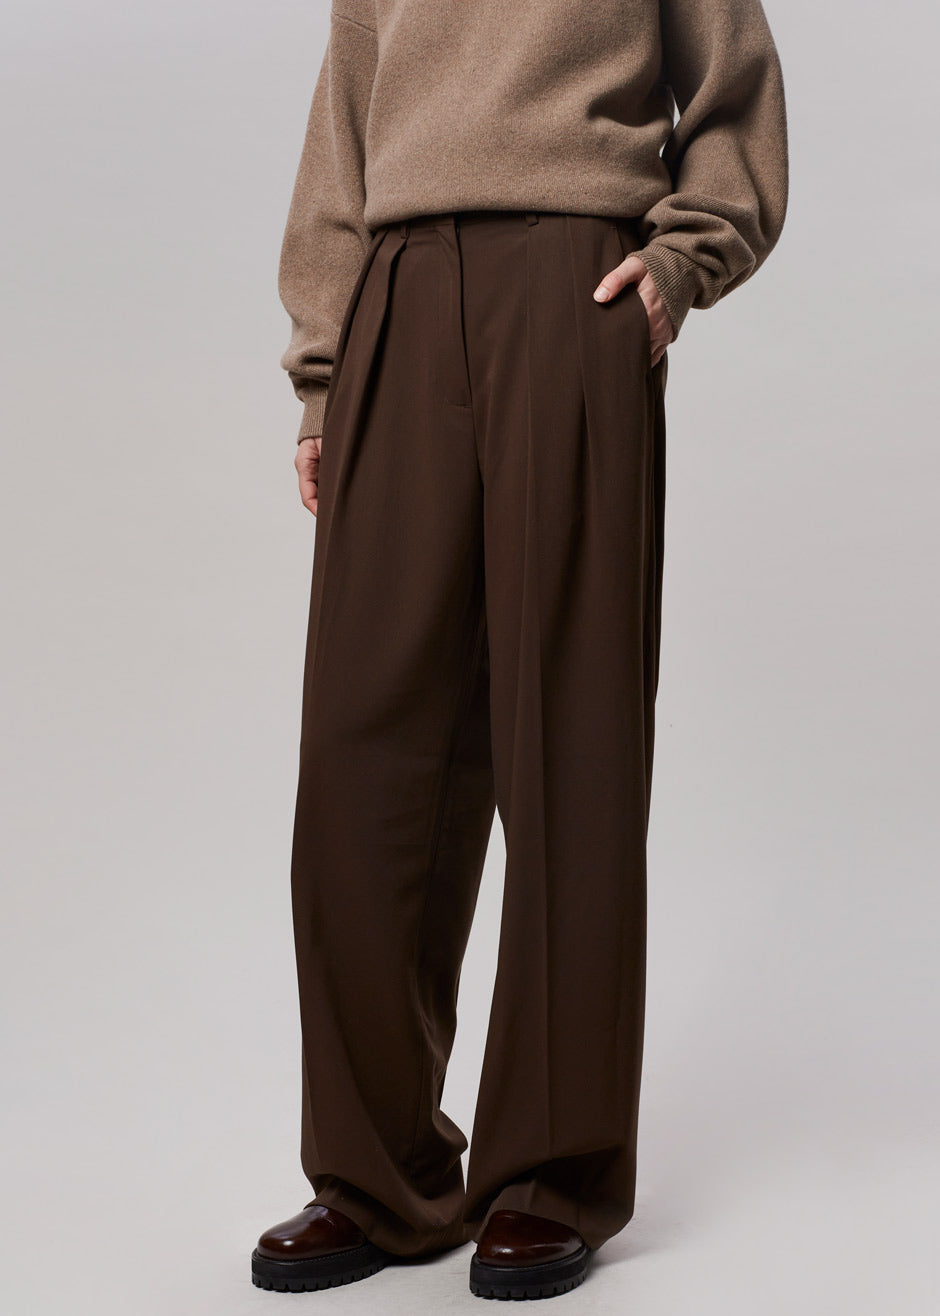 Tansy Pleated Trousers - Chocolate - 8